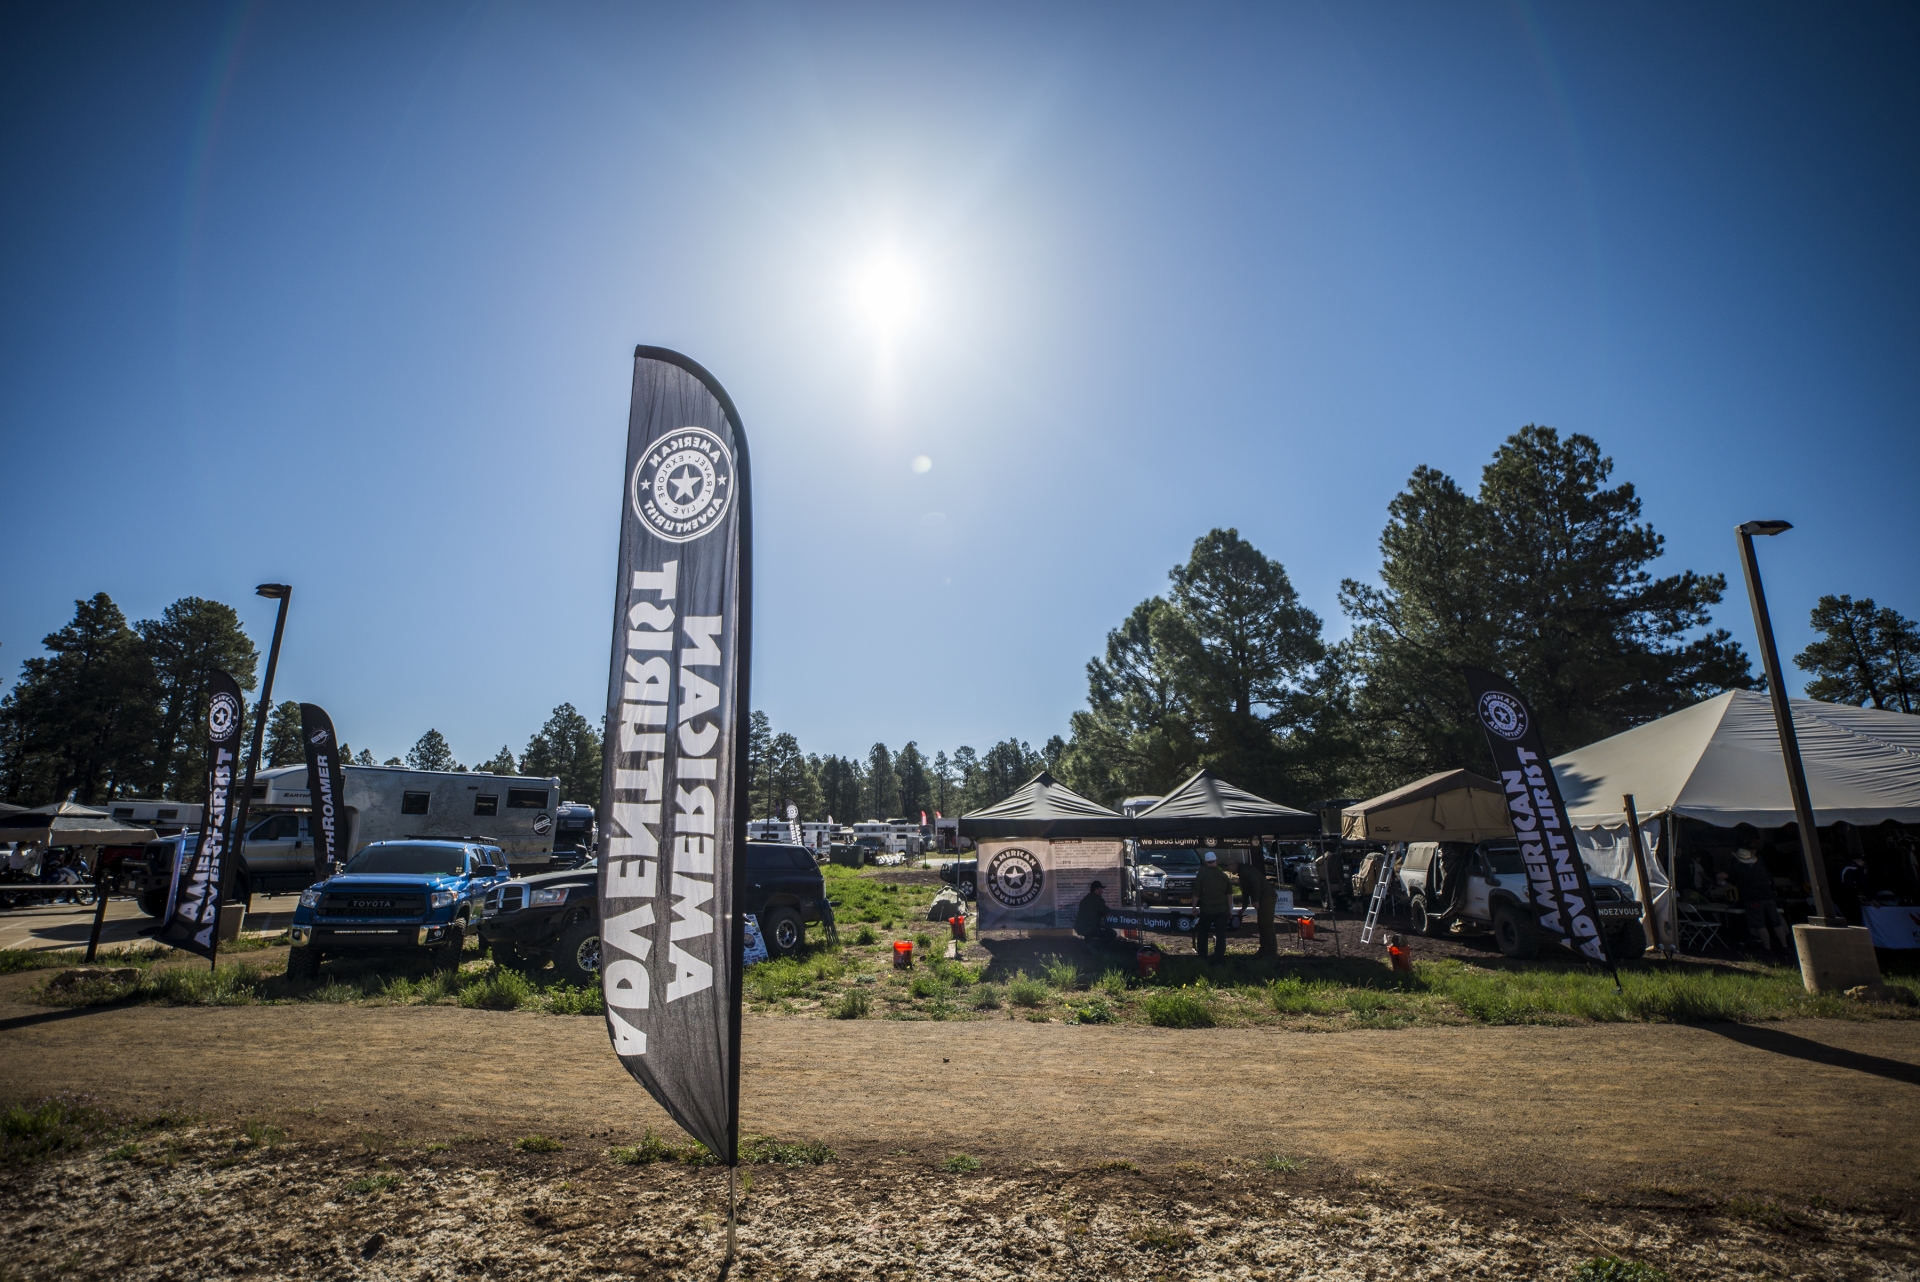 2018 overland expo west classes